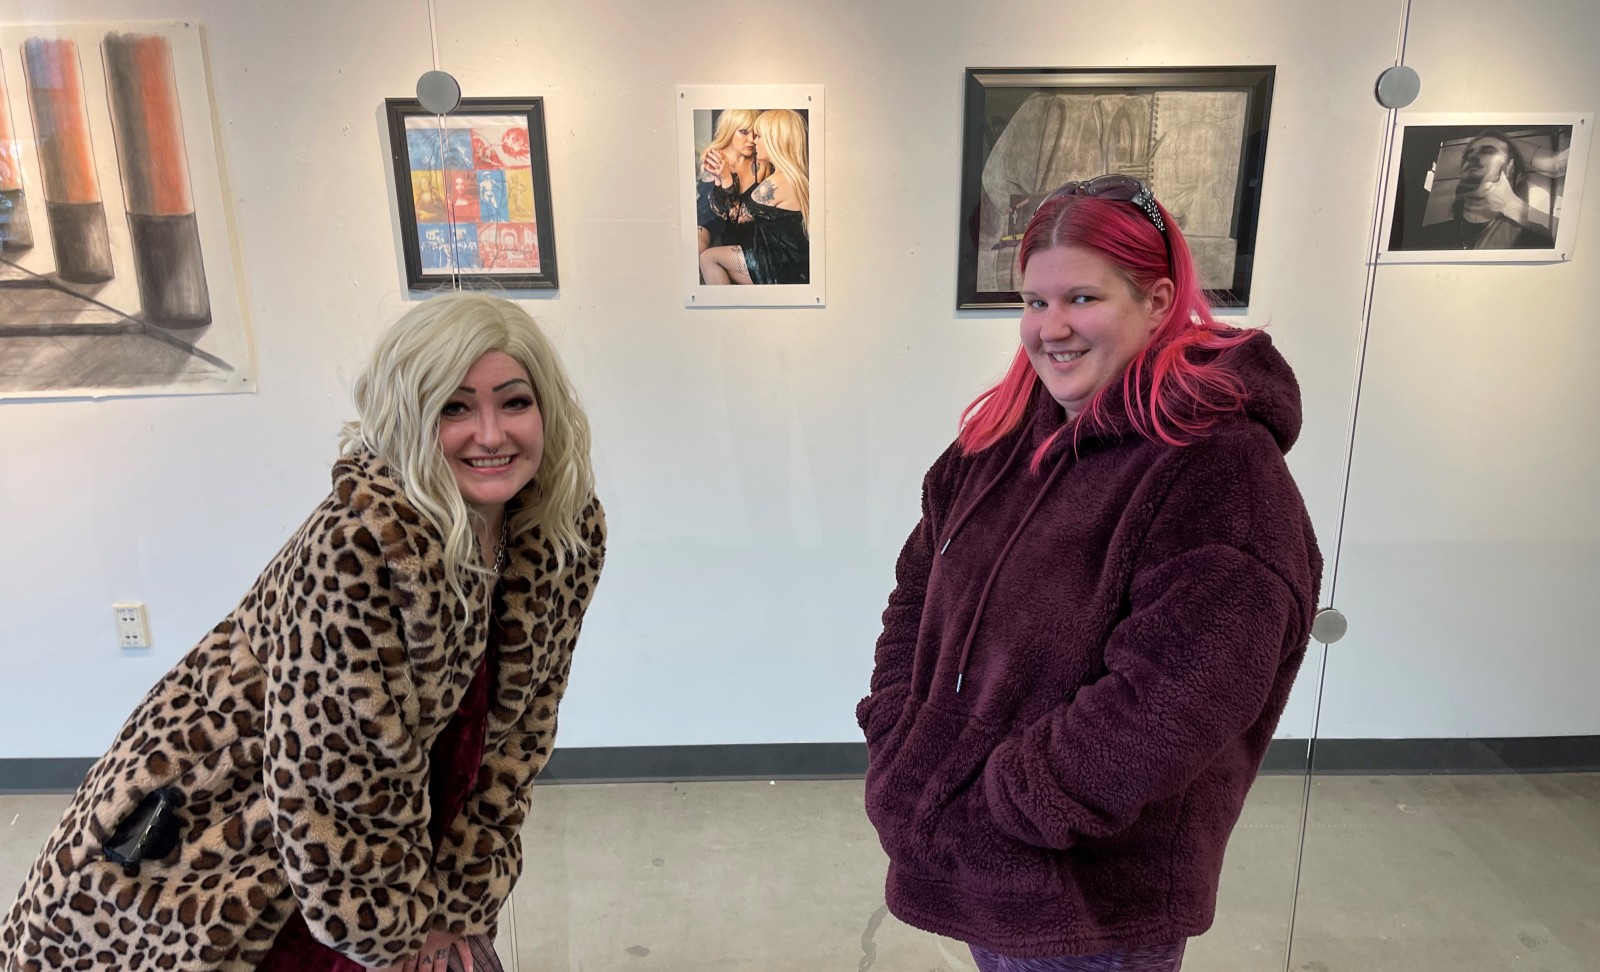 2022 Juried Art Exhibition winner, Christy Runion, right, alongside the model for her photography submission on display at the N